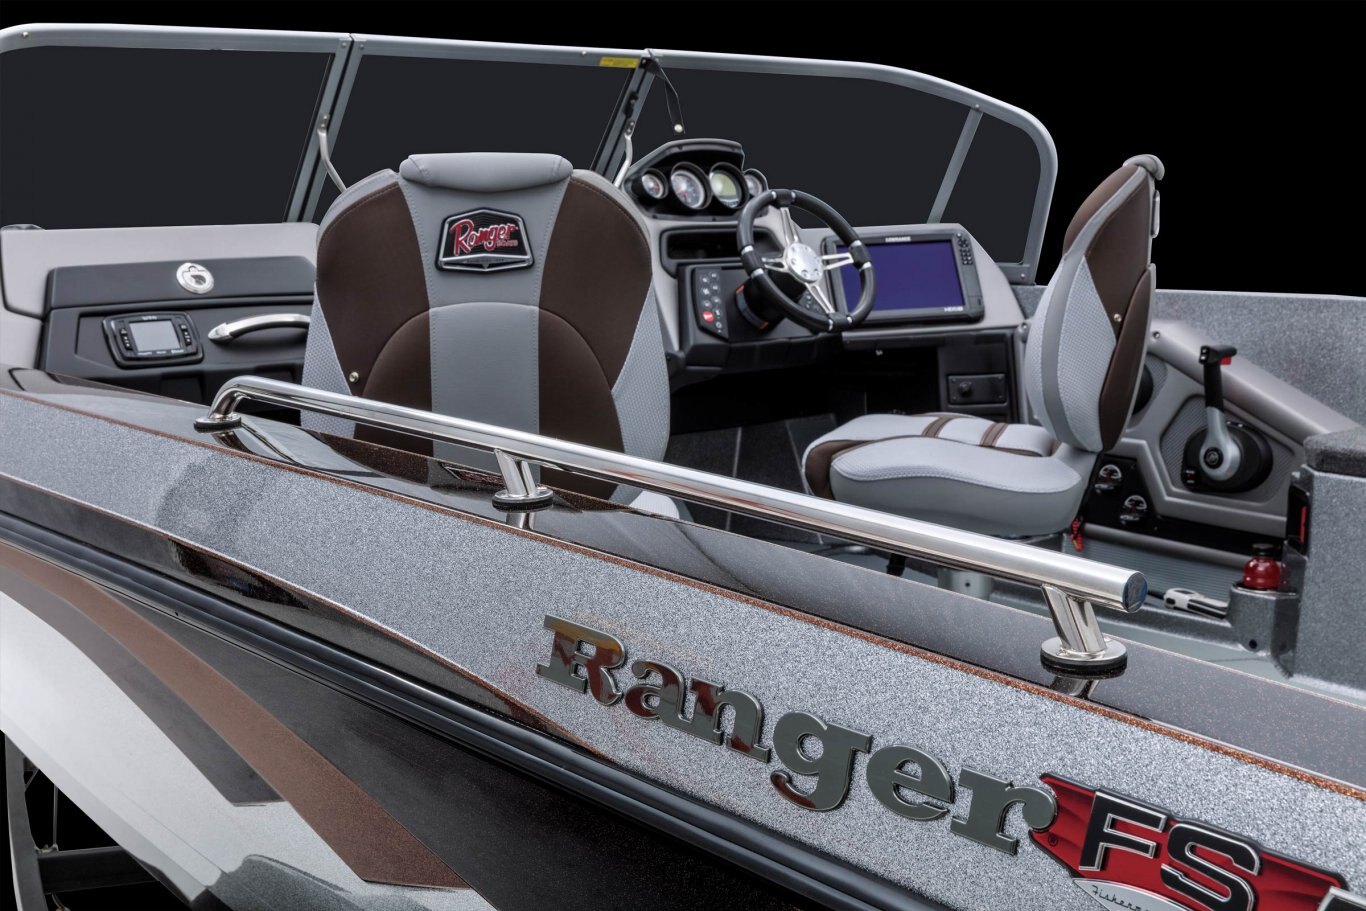 2022 Ranger 620FS CUP EQUIPPED